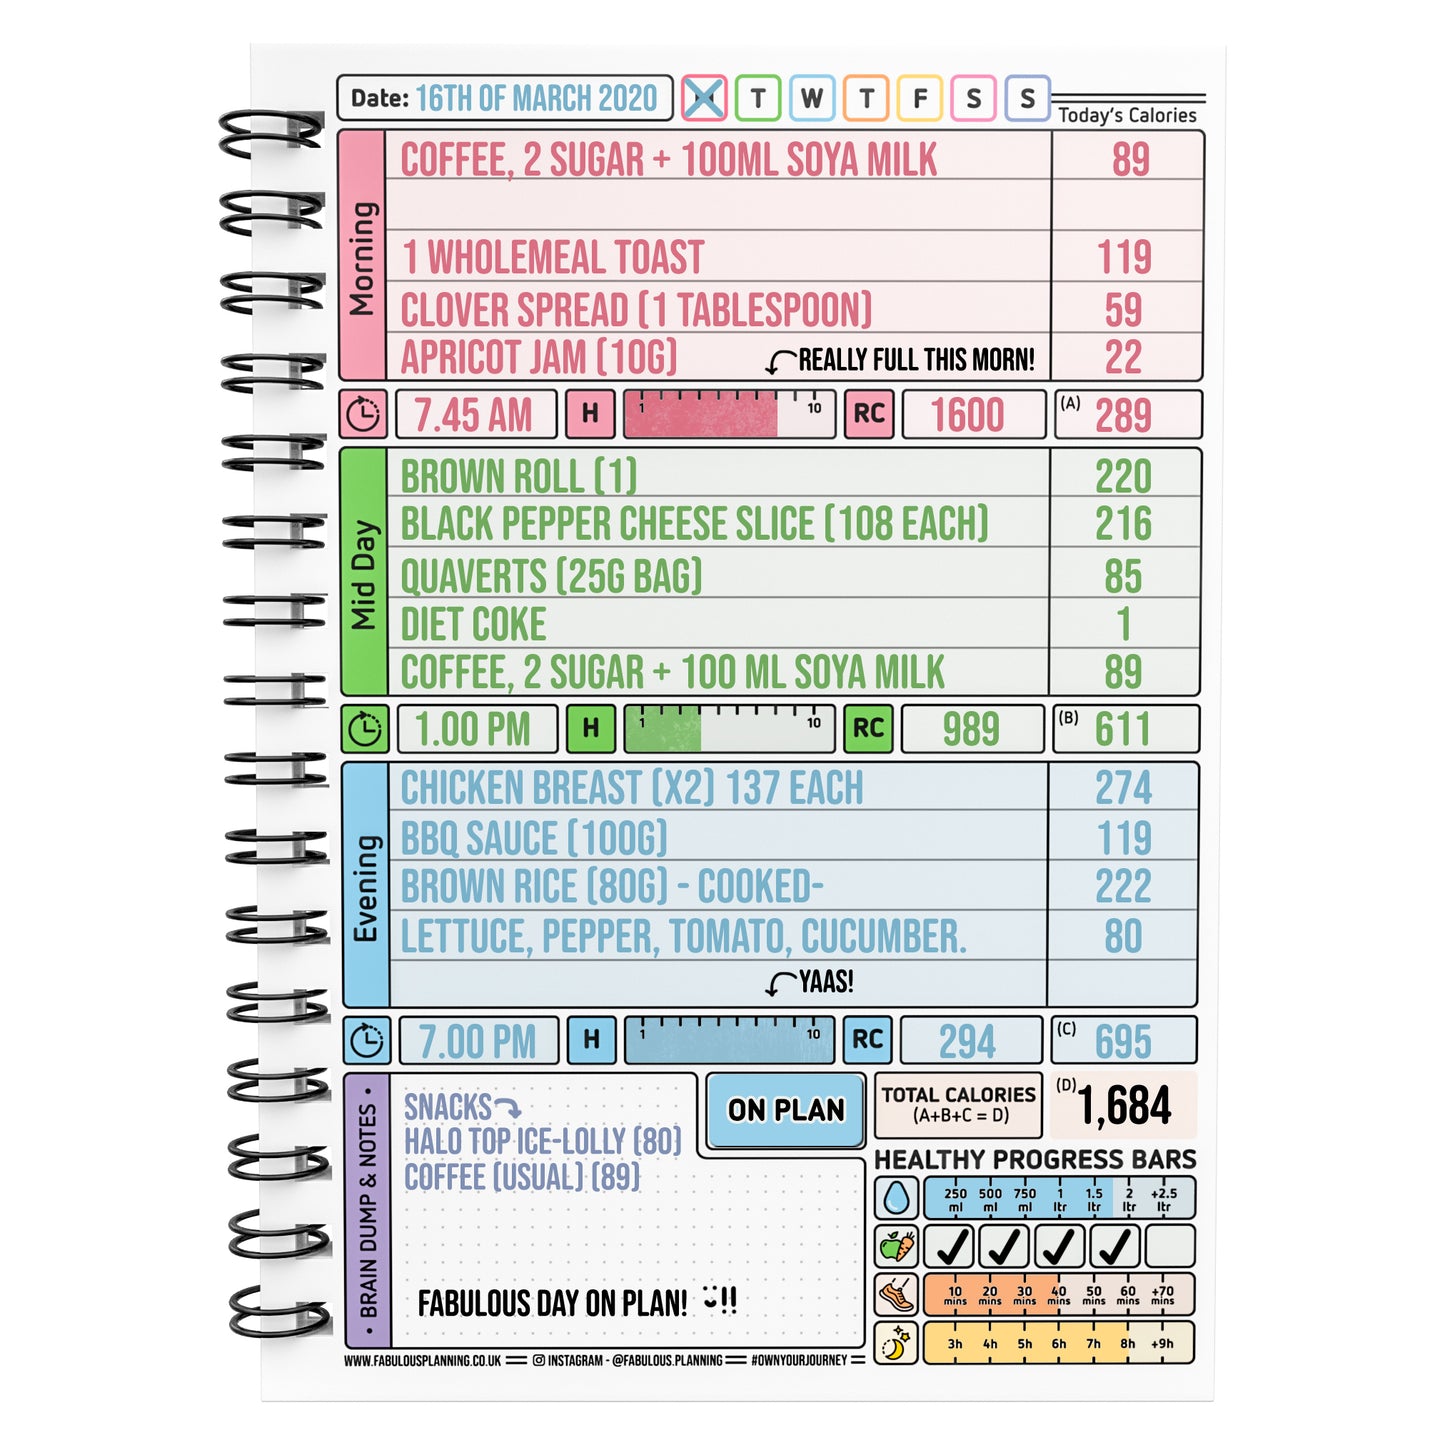 Food Diary - C29 - Calorie Counting